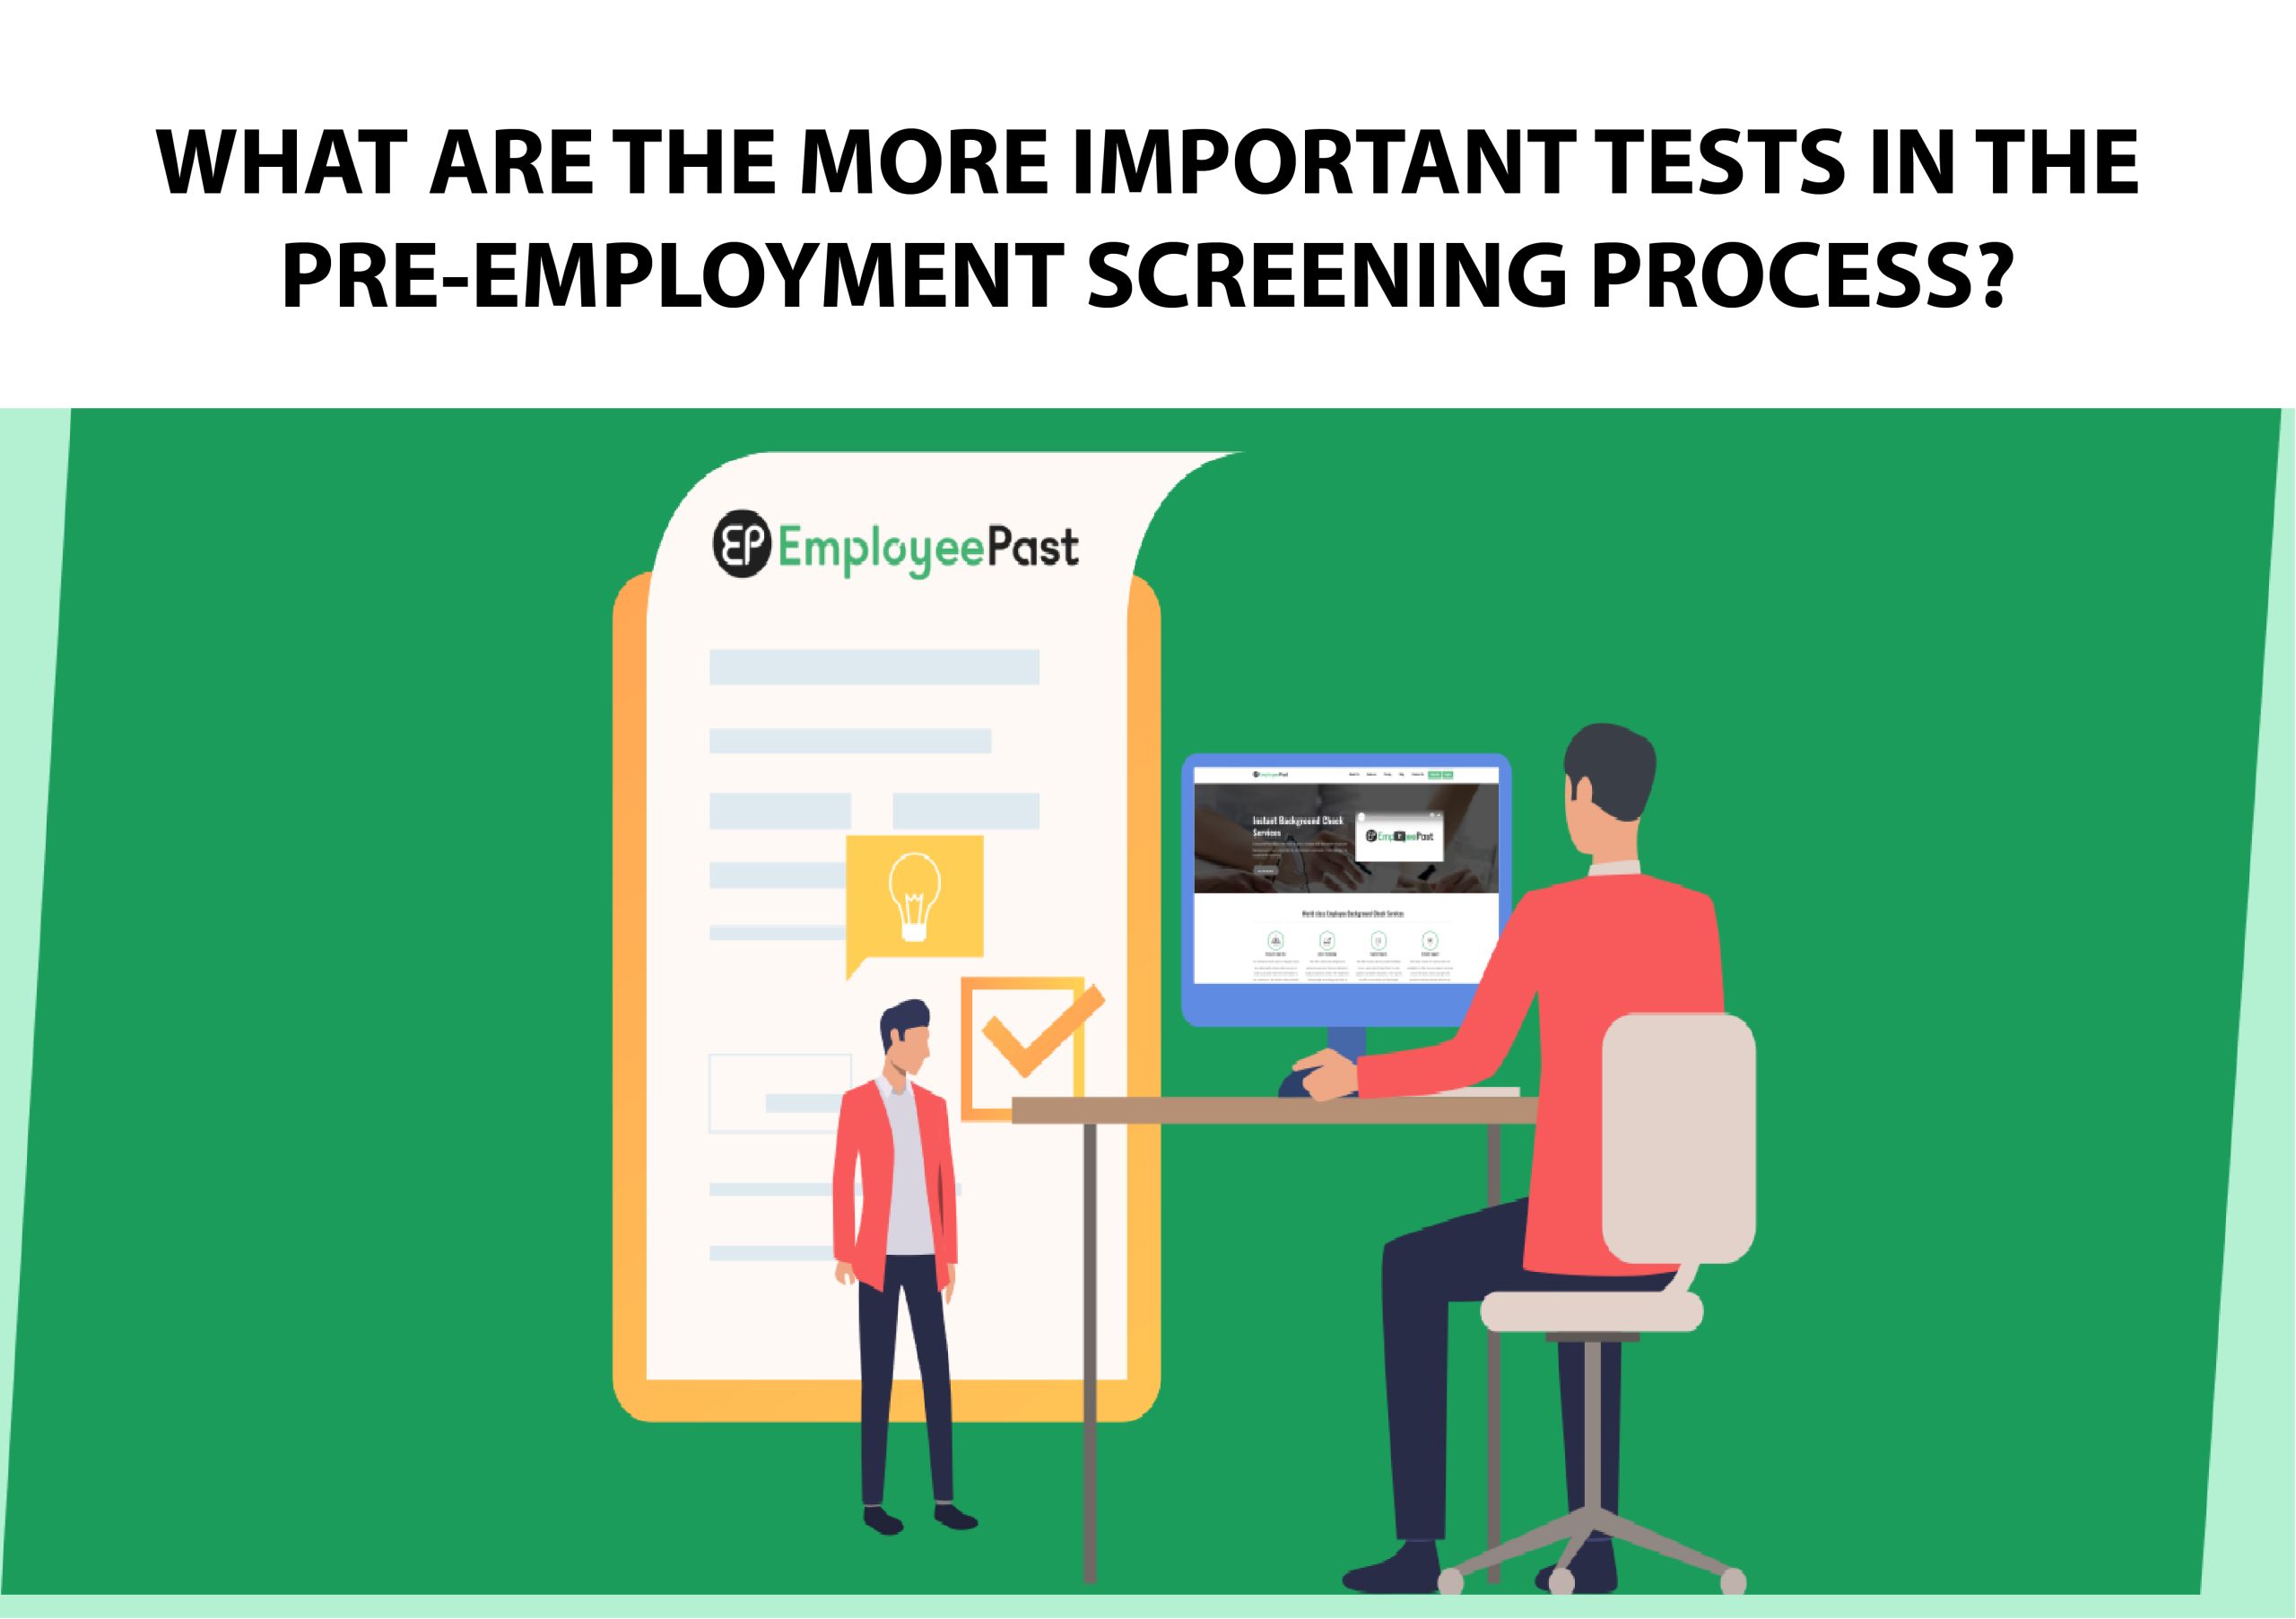 WHAT ARE THE MORE IMPORTANT TESTS IN THE PRE-EMPLOYMENT SCREENING PROCESS?